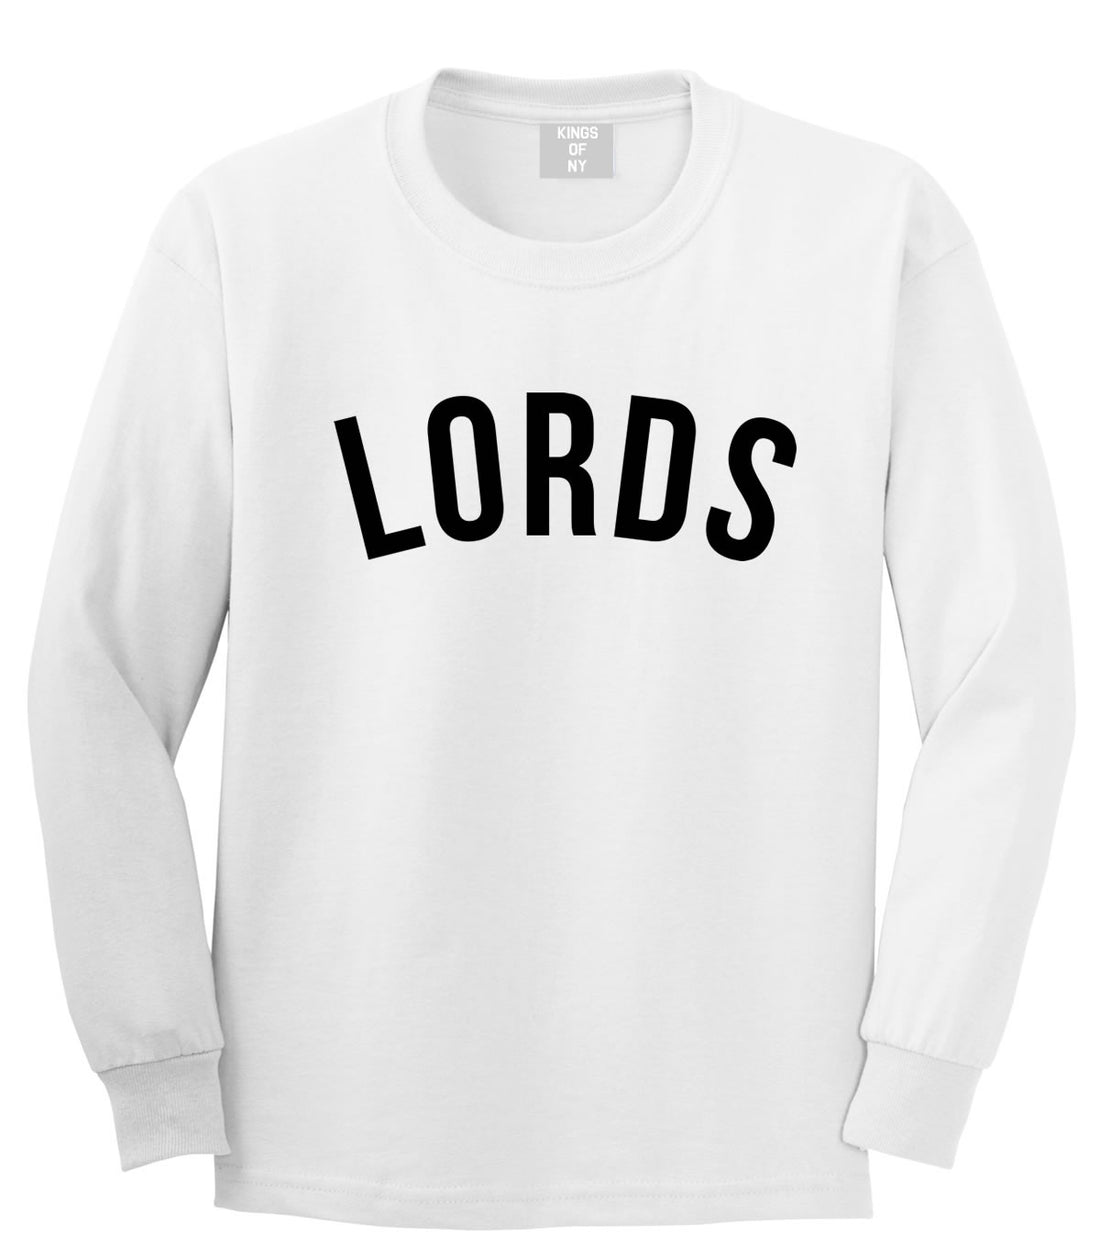 Kings Of NY Lords Long Sleeve T-Shirt in White